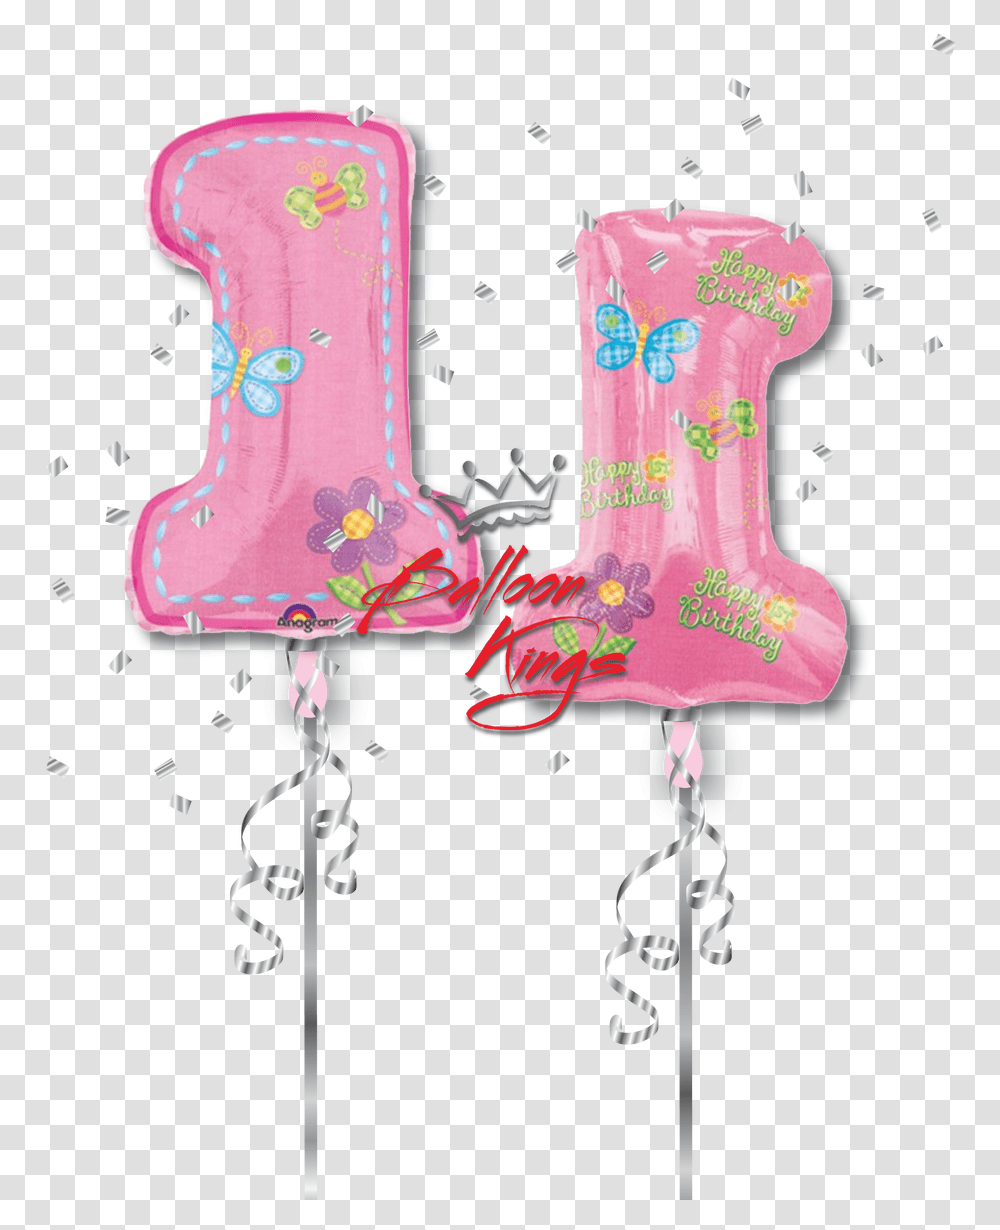 1st Birthday Girl Number D 1st Birthday Balloons, Text, Christmas Stocking, Gift, Sweets Transparent Png